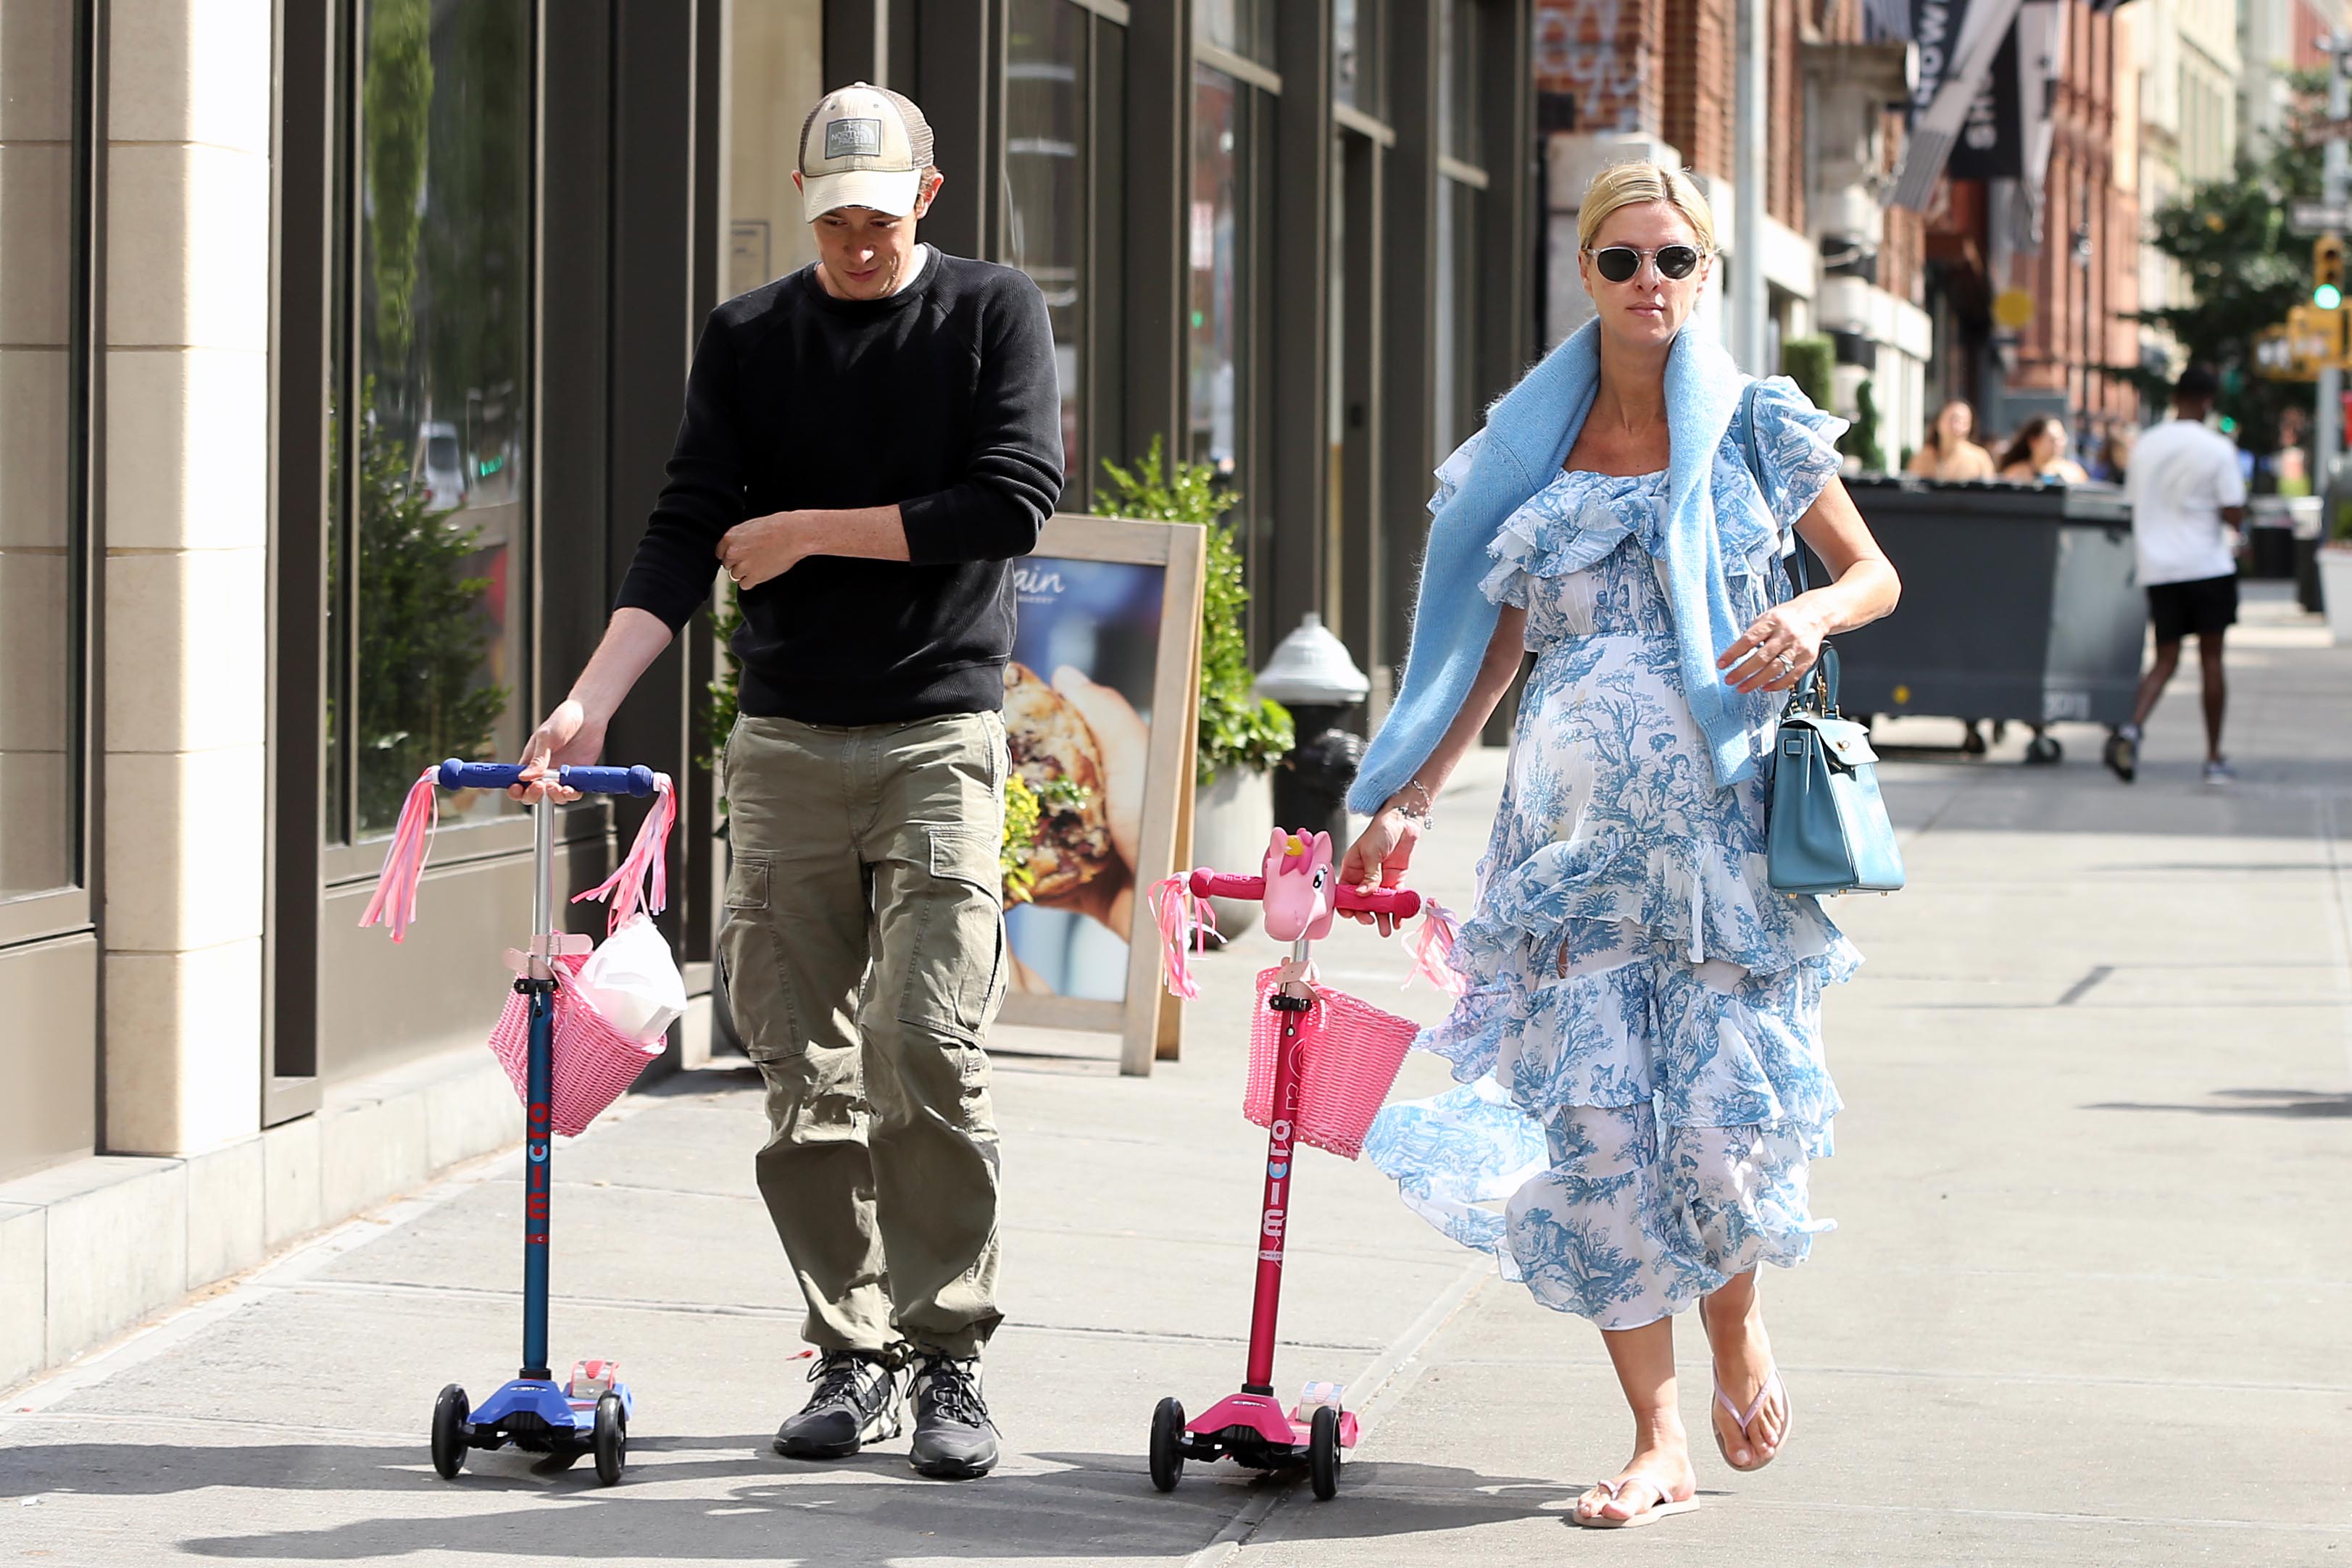 Nicky Hilton and her husband, James Rothschild, bought skateboards as a gift for their daughters in anticipation of the arrival of their baby, since she is pregnant about to give birth